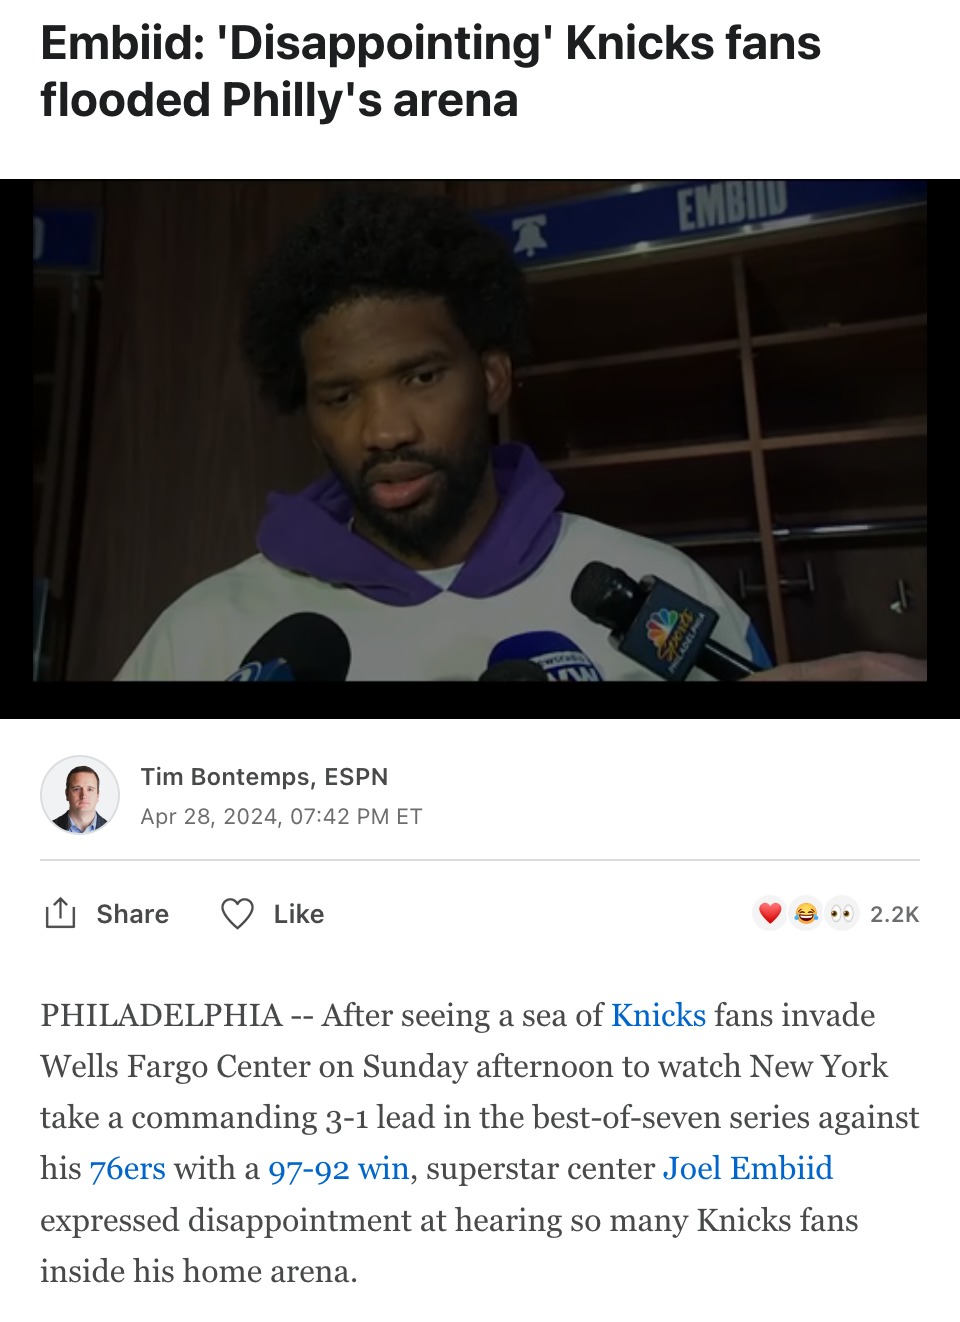 Embiid: 'Disappointing' Knicks fans flooded Philly's arena - meme